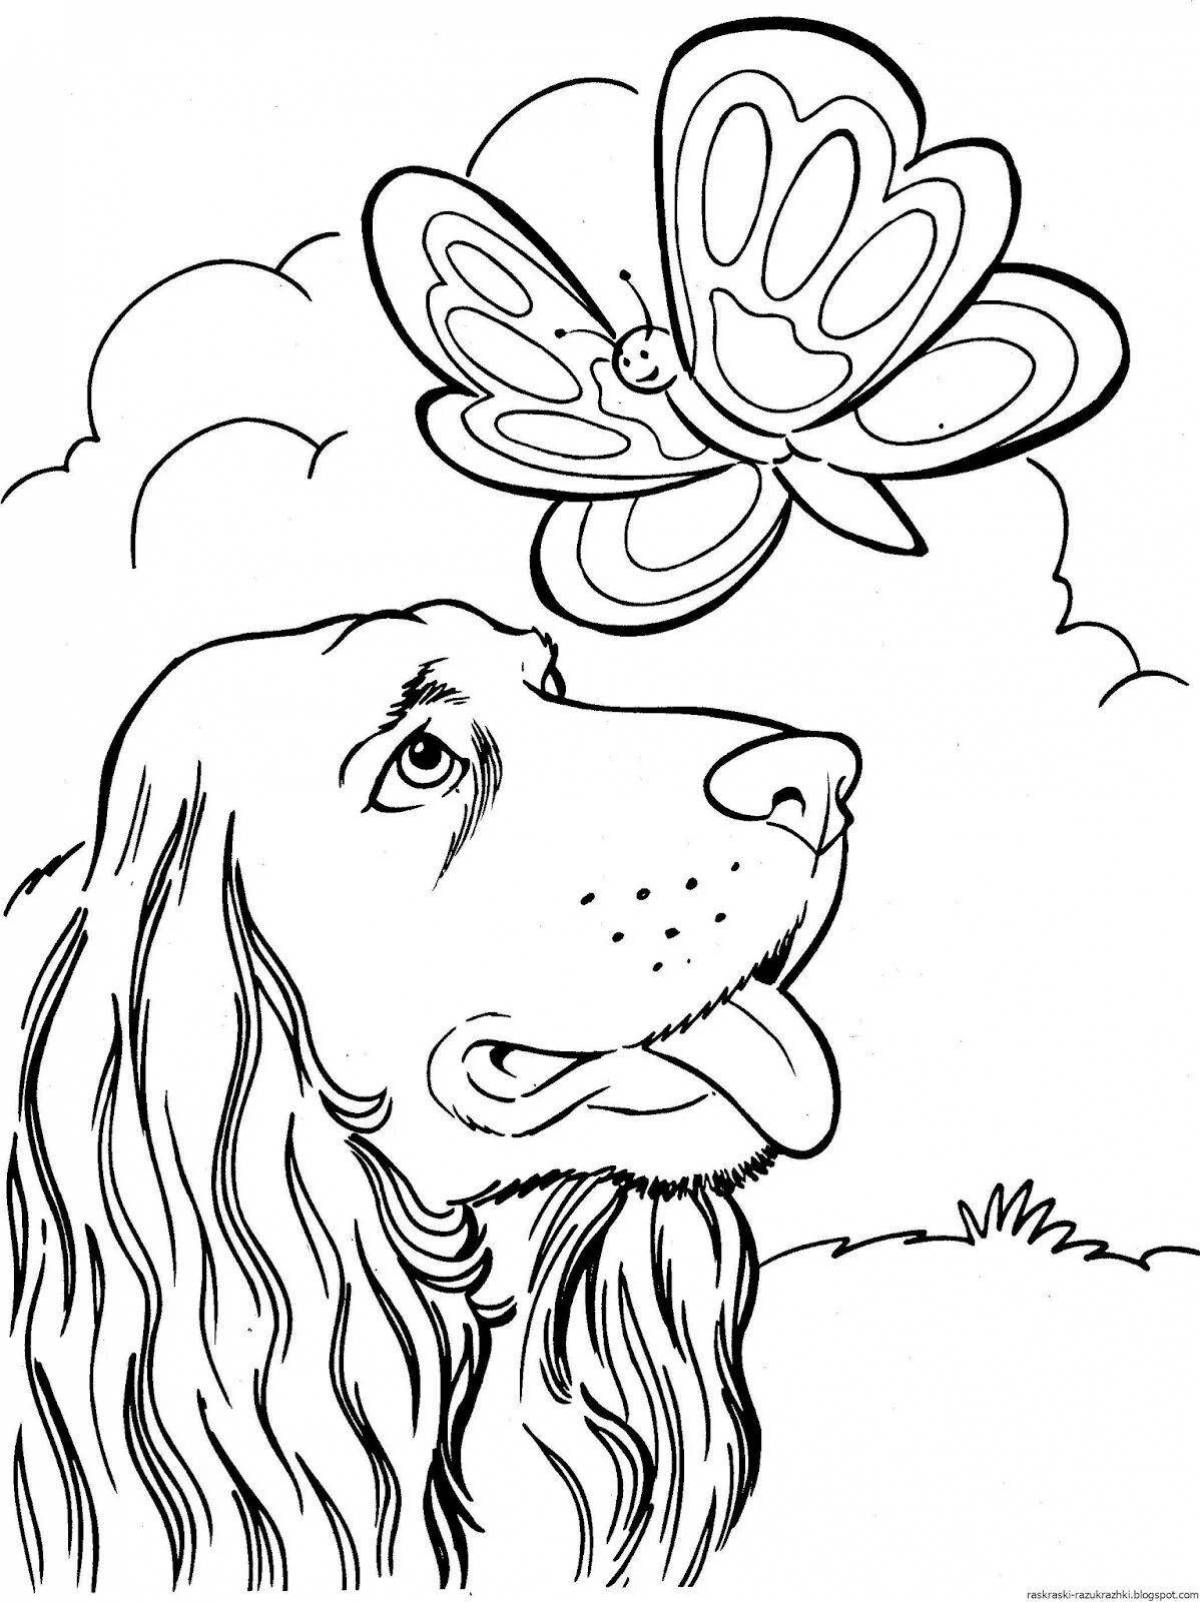 Joyful coloring for girls with 9 year old animals